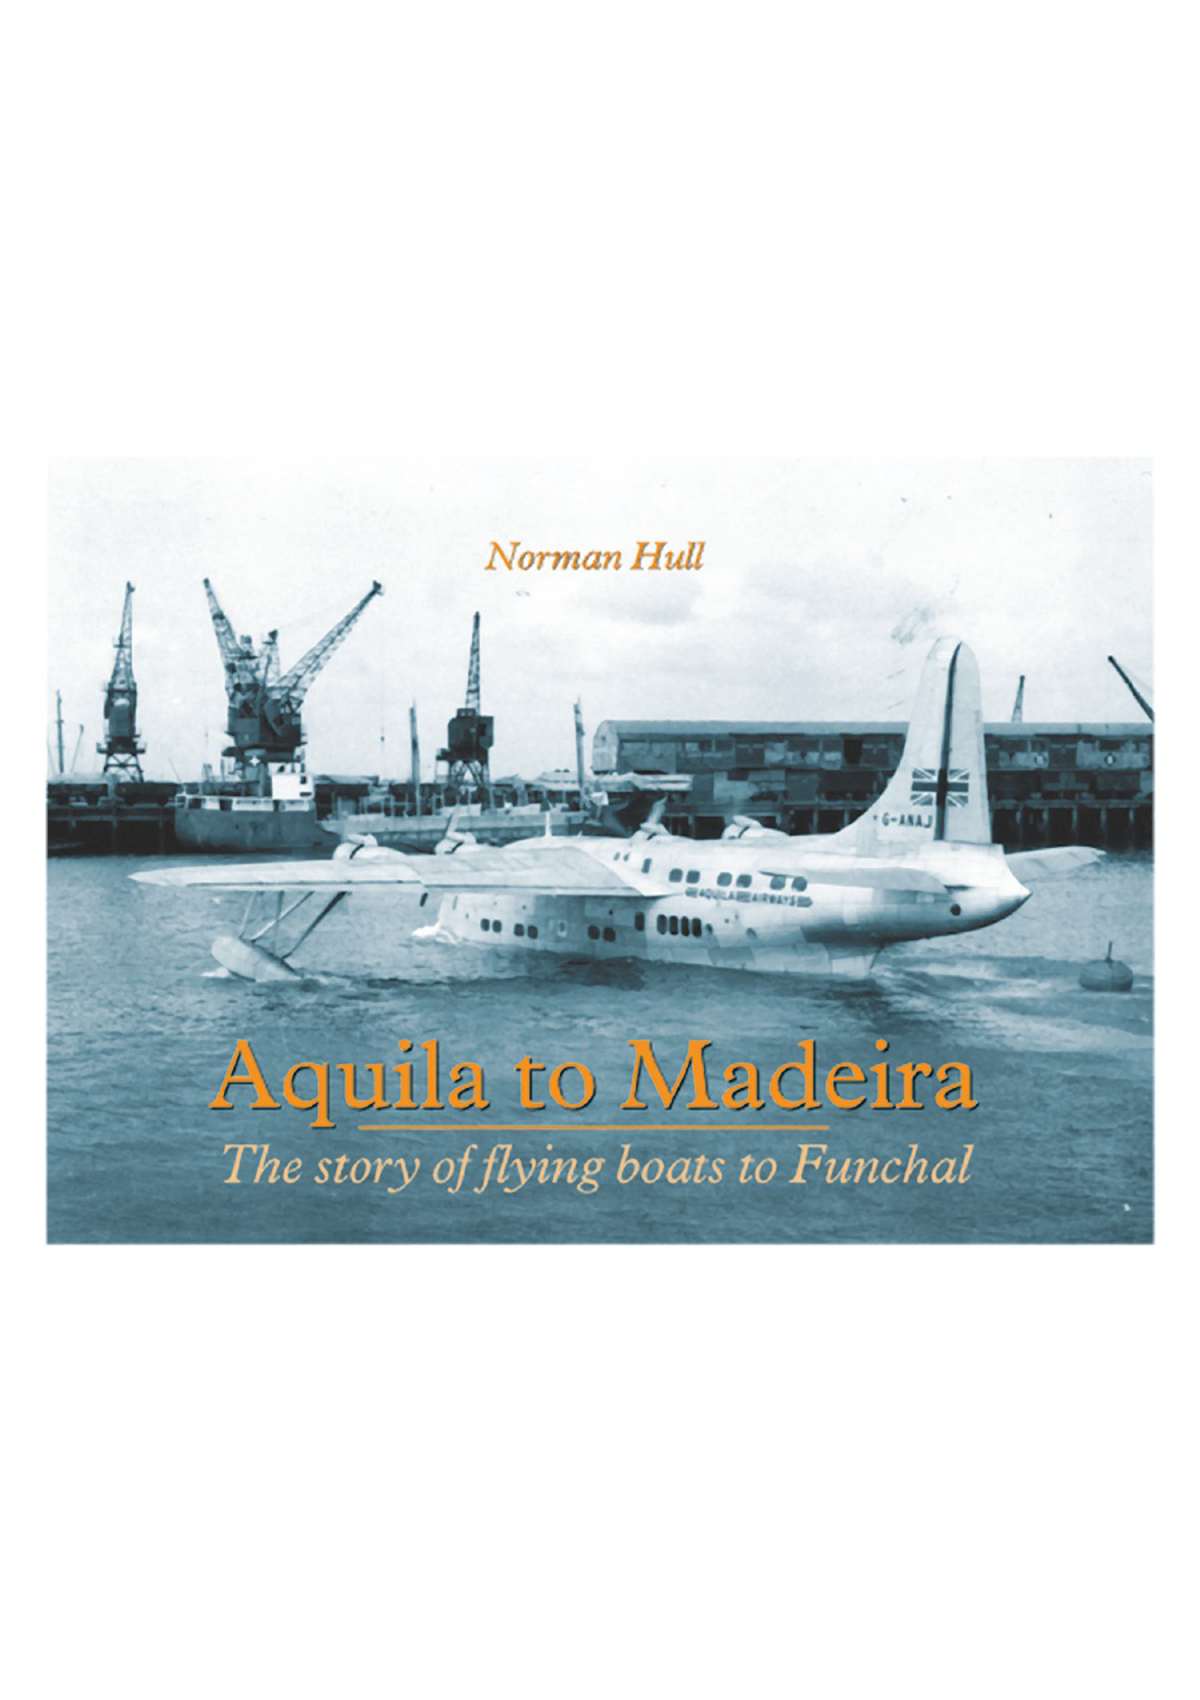 3511 - Aquila to Madeira The story of flying boats to Funchal